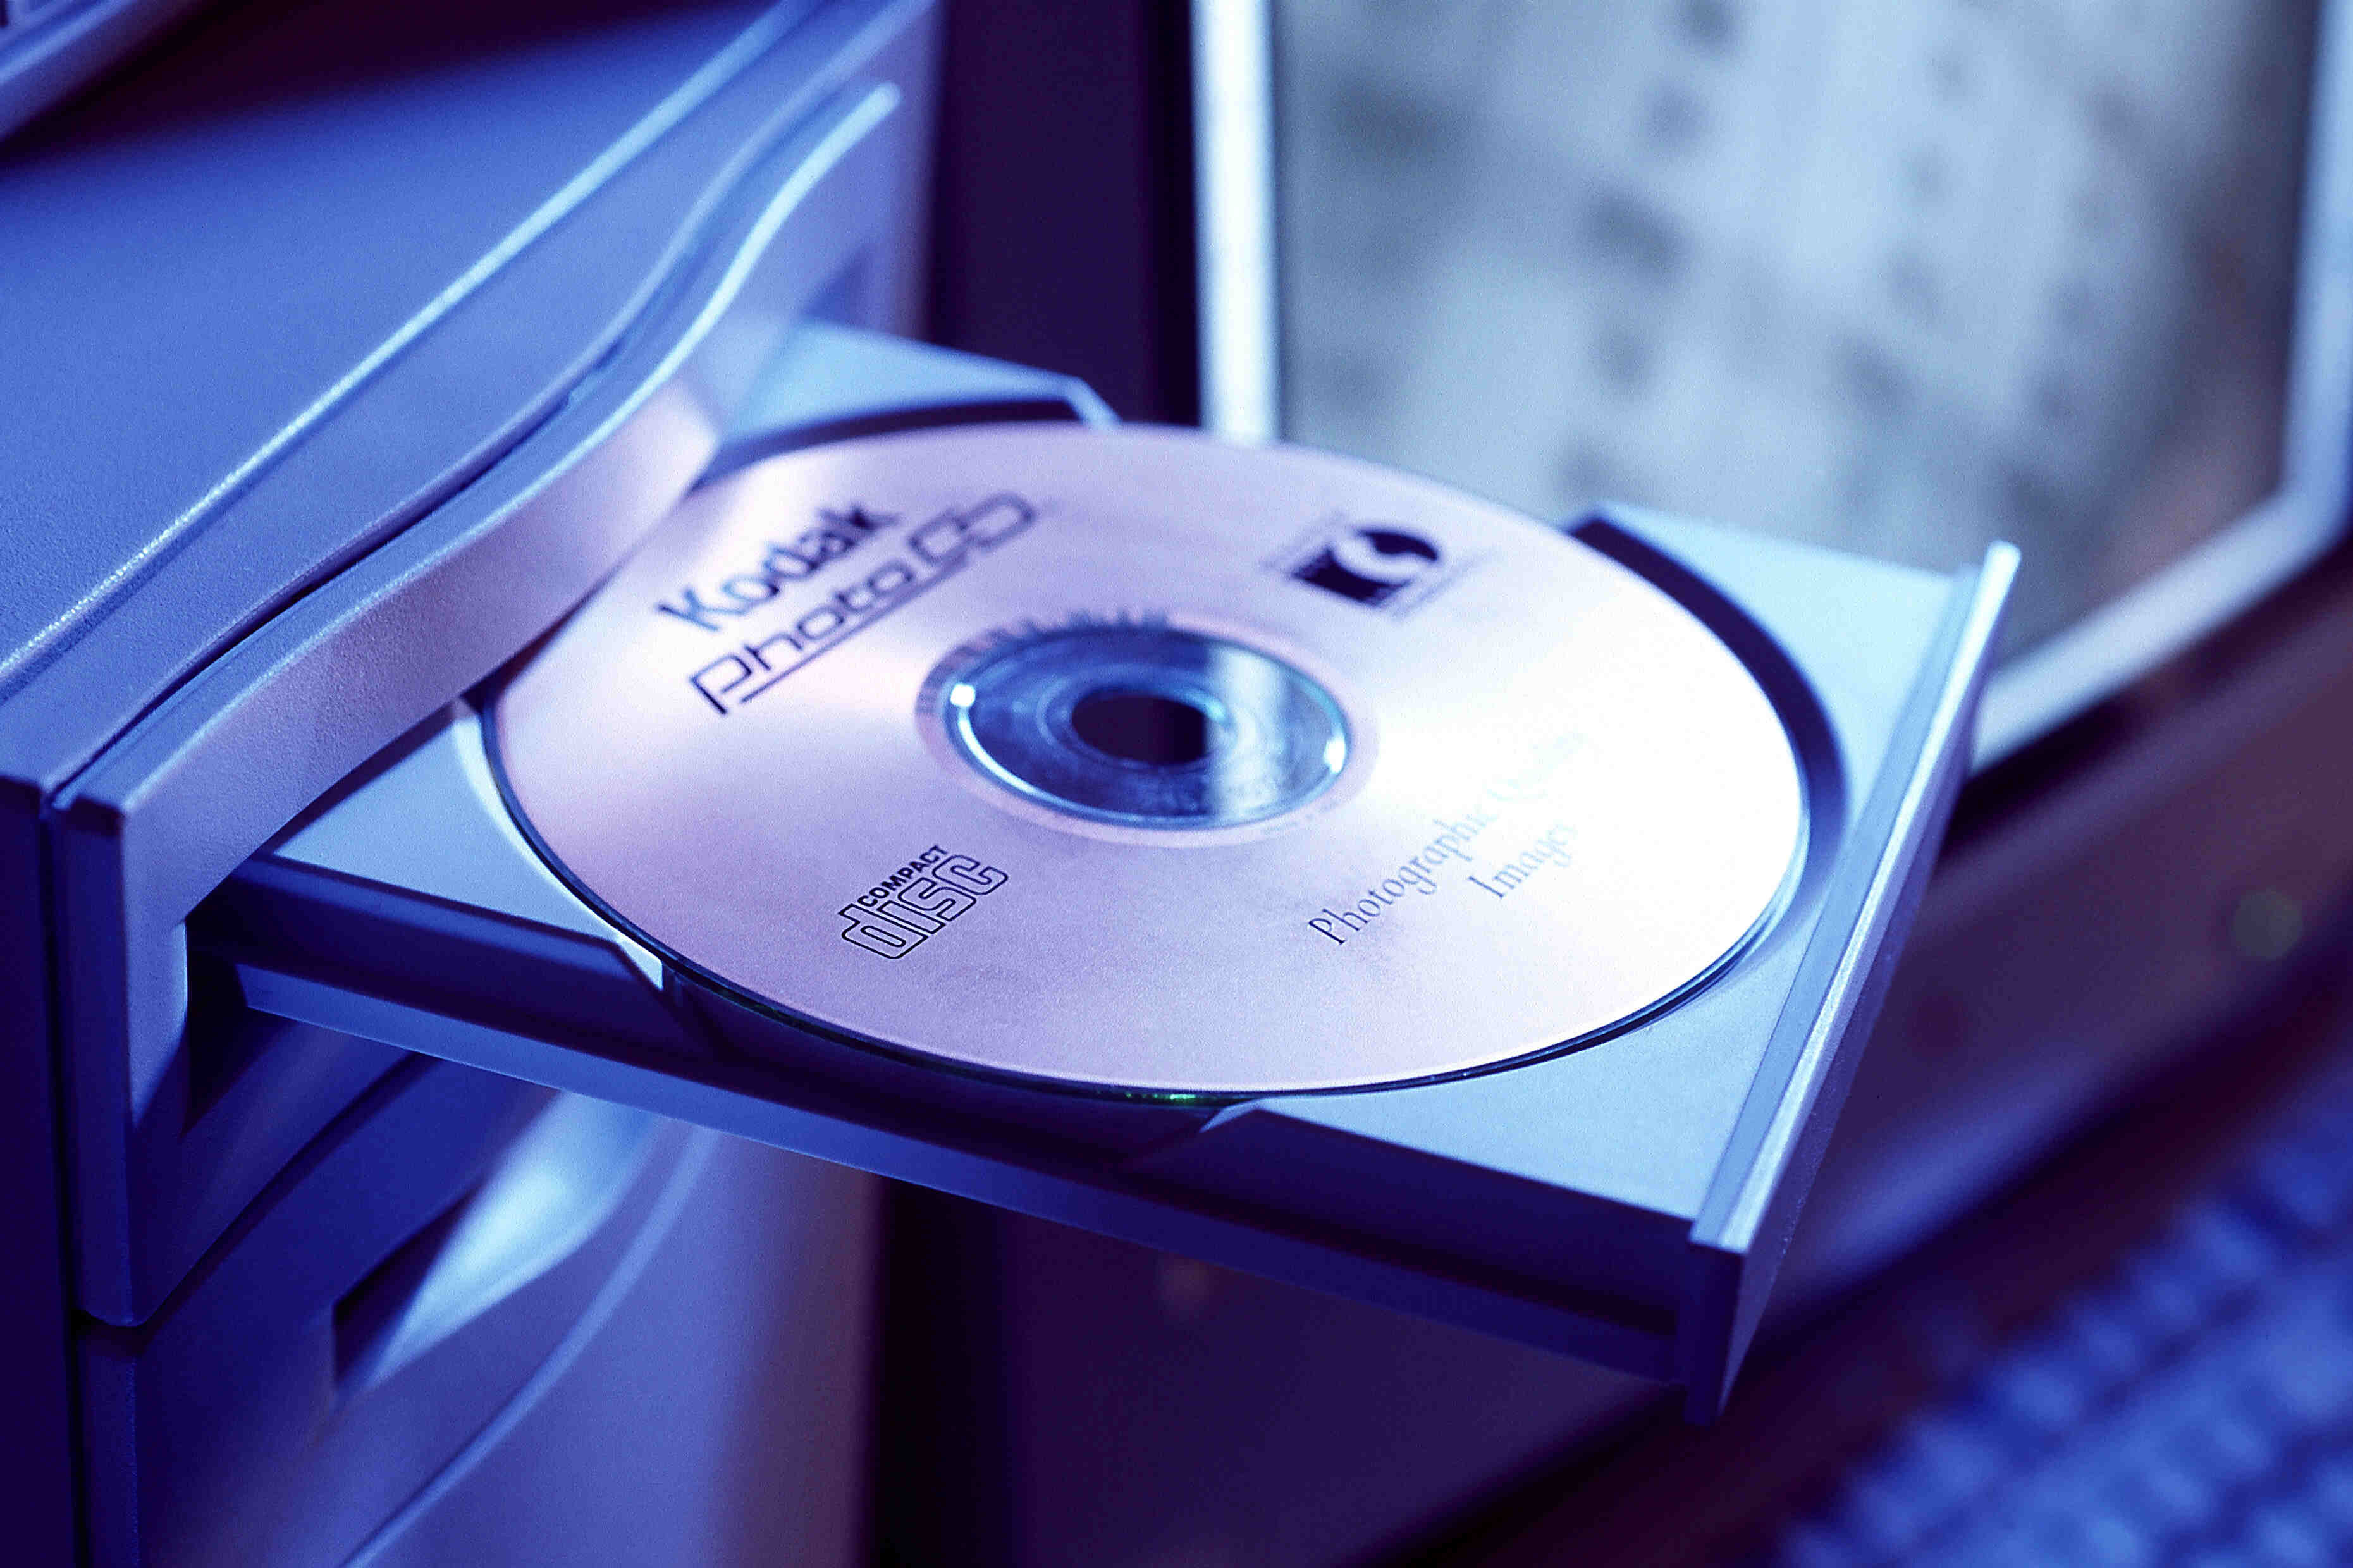 How To Download Pictures To A CD